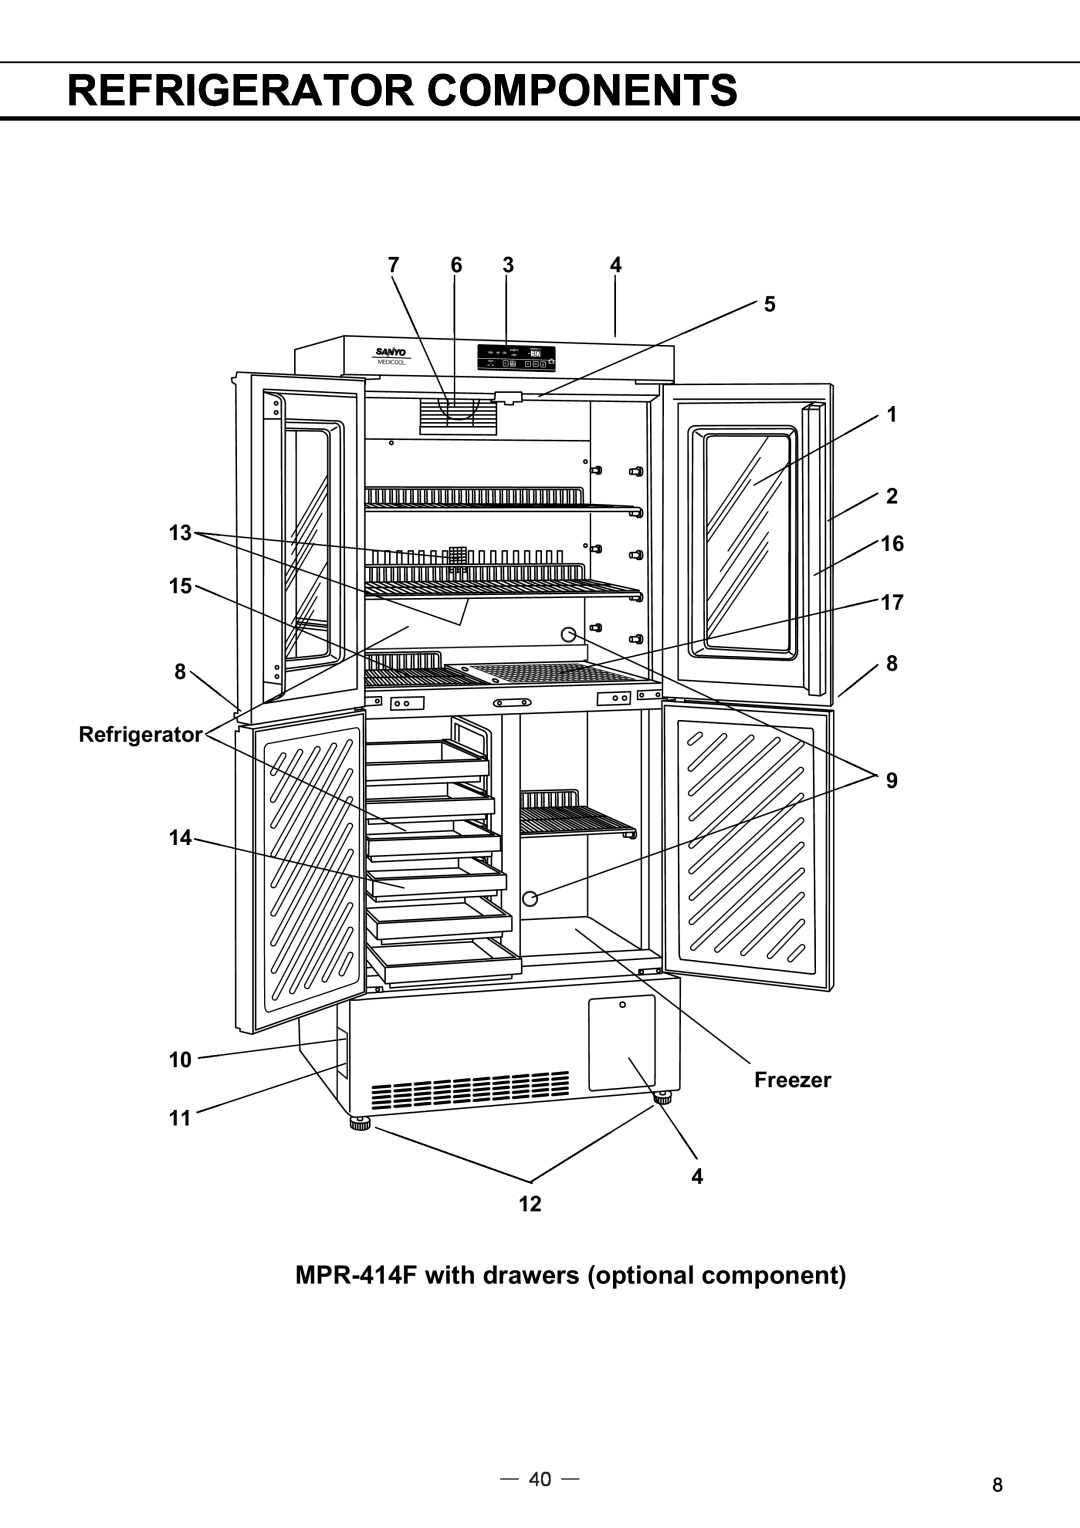 Sanyo MPR-414FS instruction manual Refrigerator Components, MPR-414F with drawers optional component 